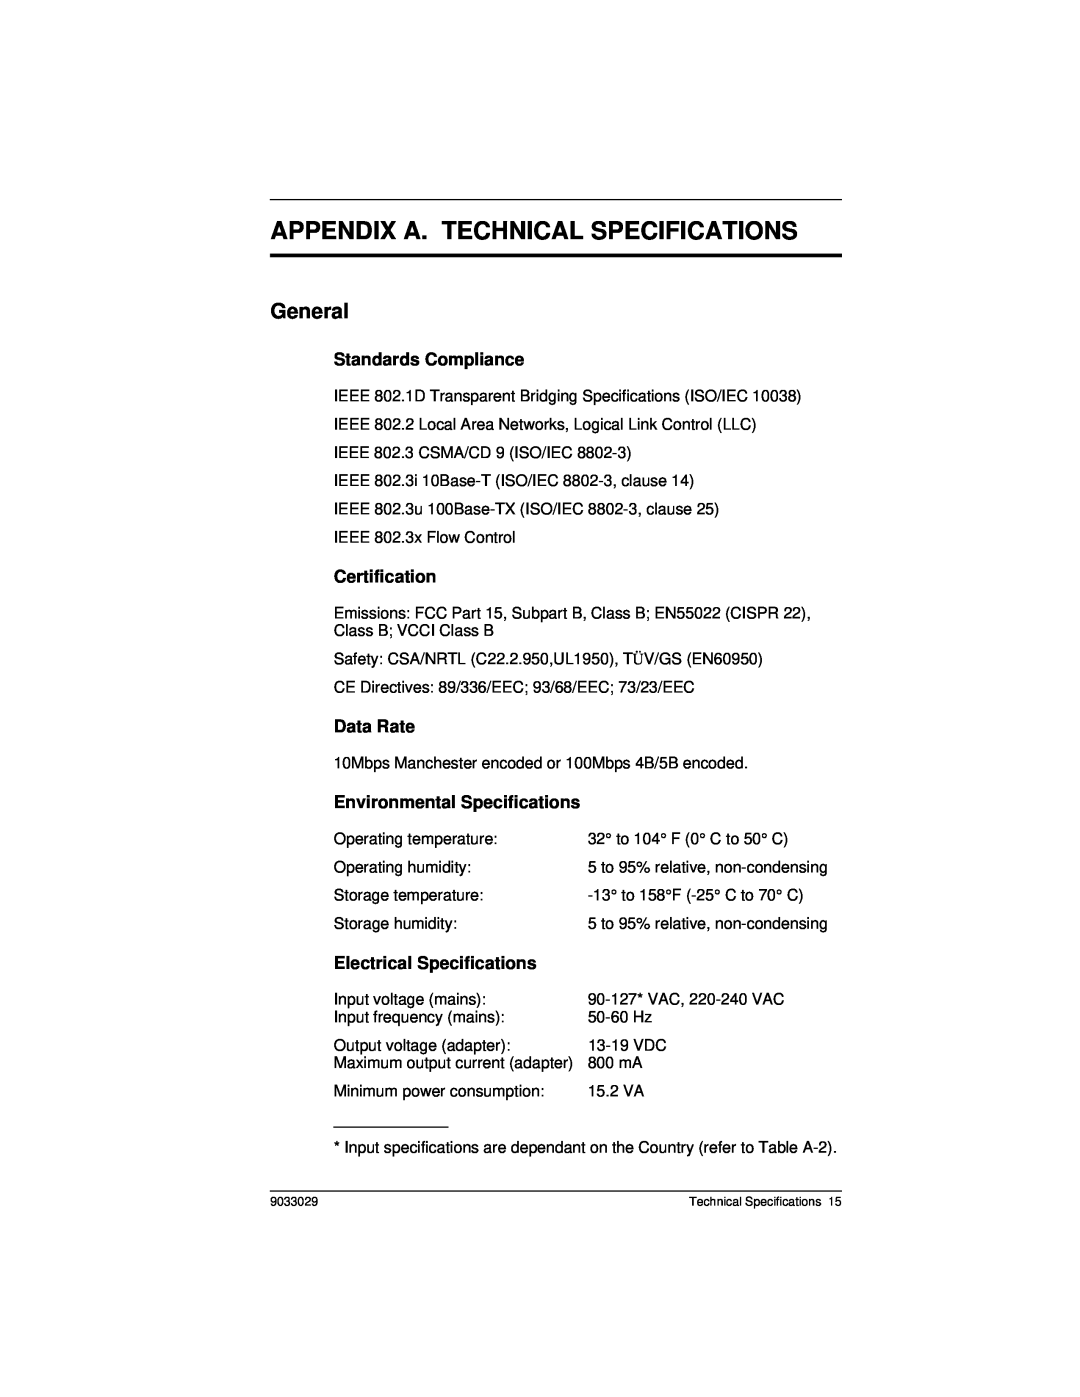 Cabletron Systems ELS100-8TXUF2 manual Appendix A. Technical Specifications, General, Standards Compliance, Certification 